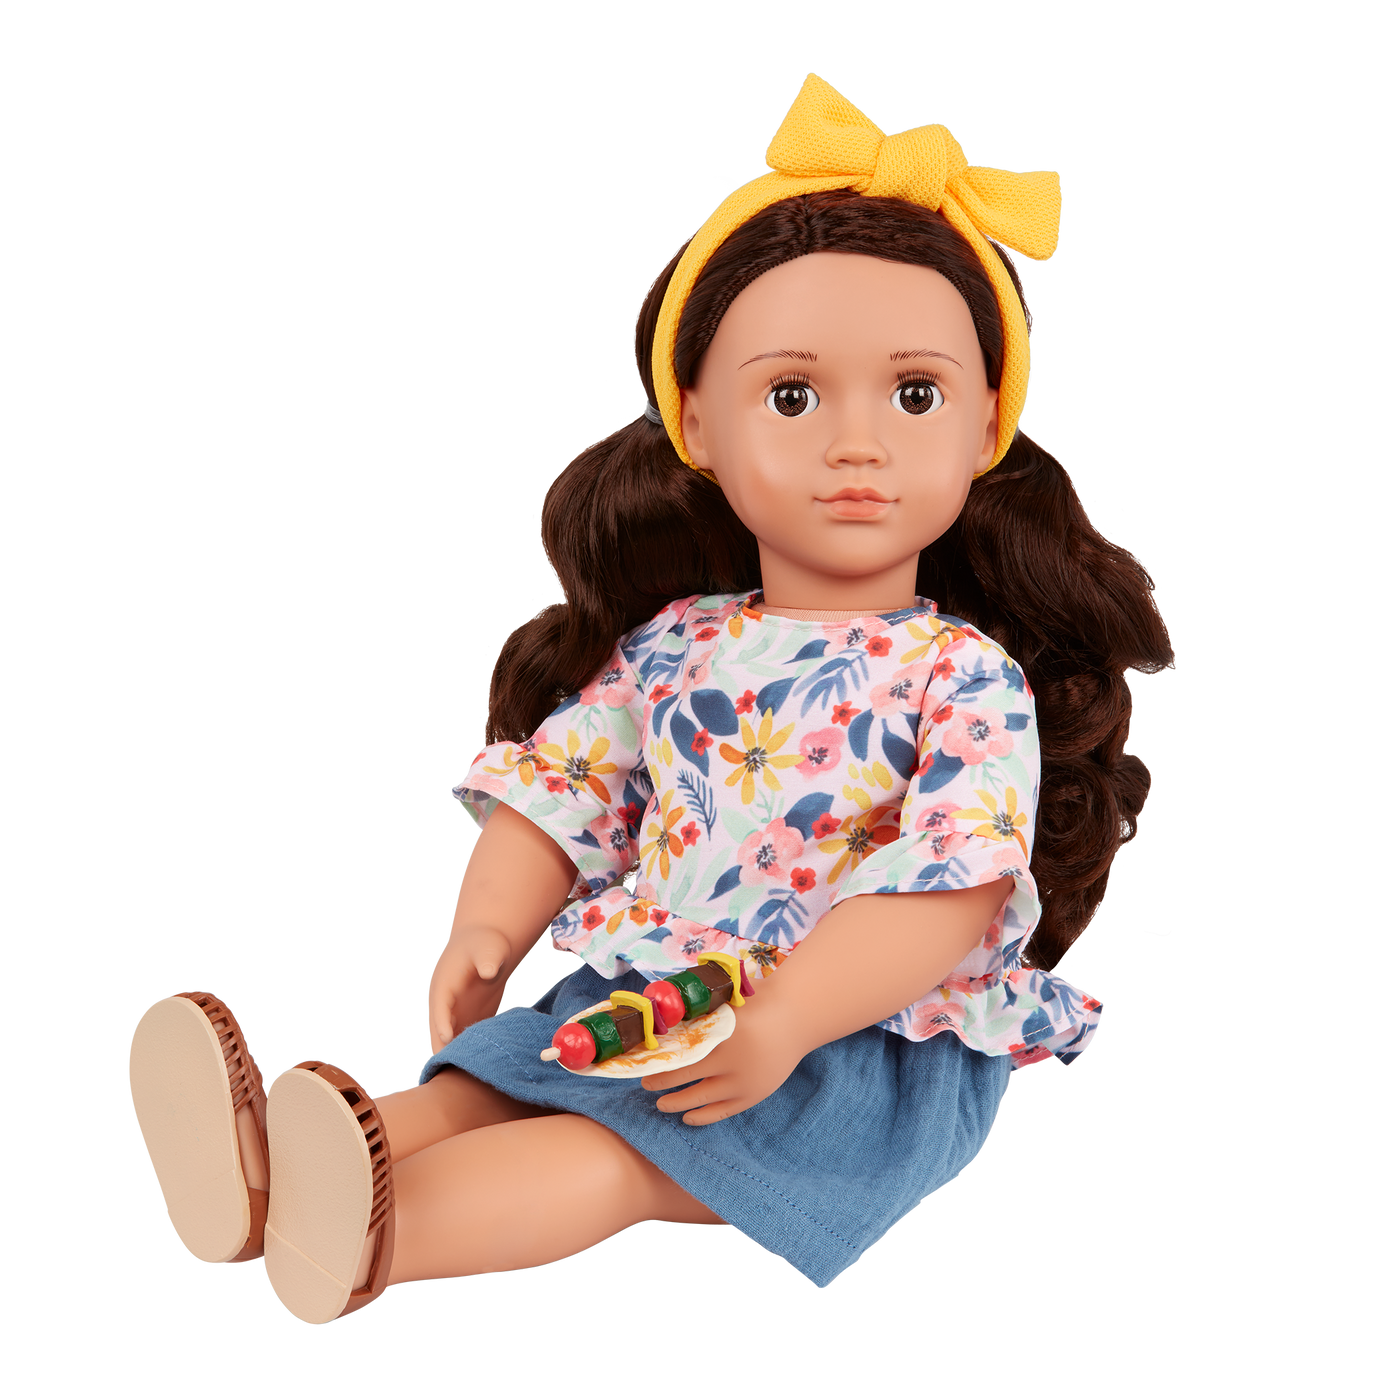 Our Generation Posable 18-inch Doll Rayna